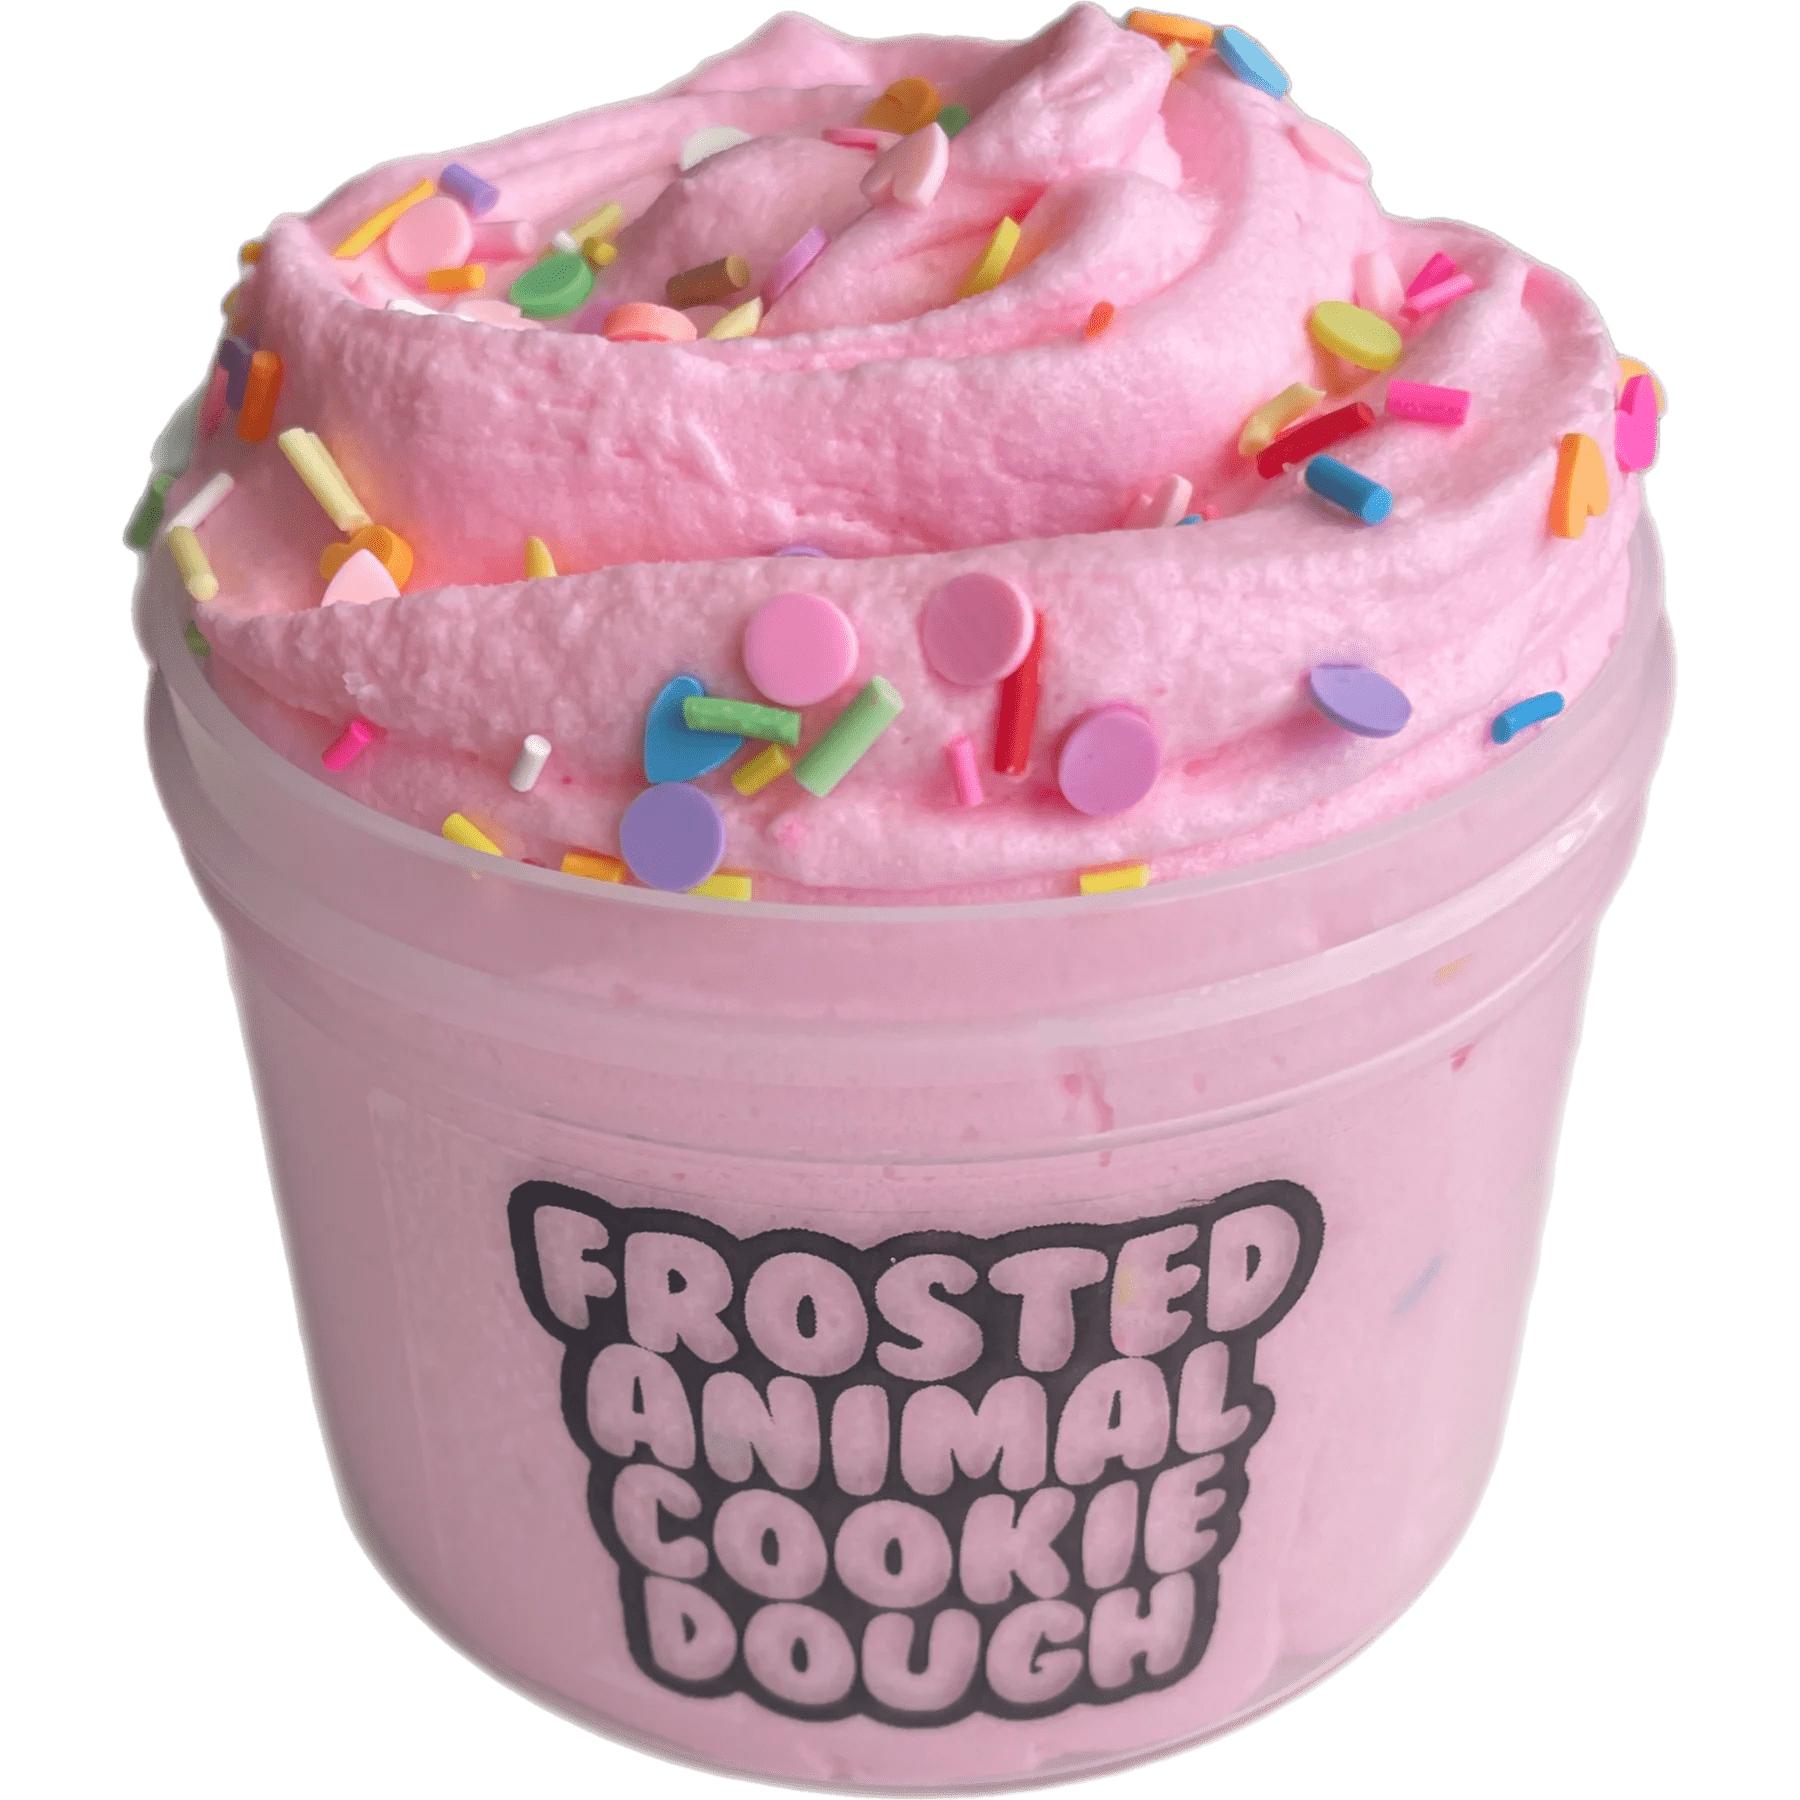 FROSTED ANIMAL COOKIE DOUGH